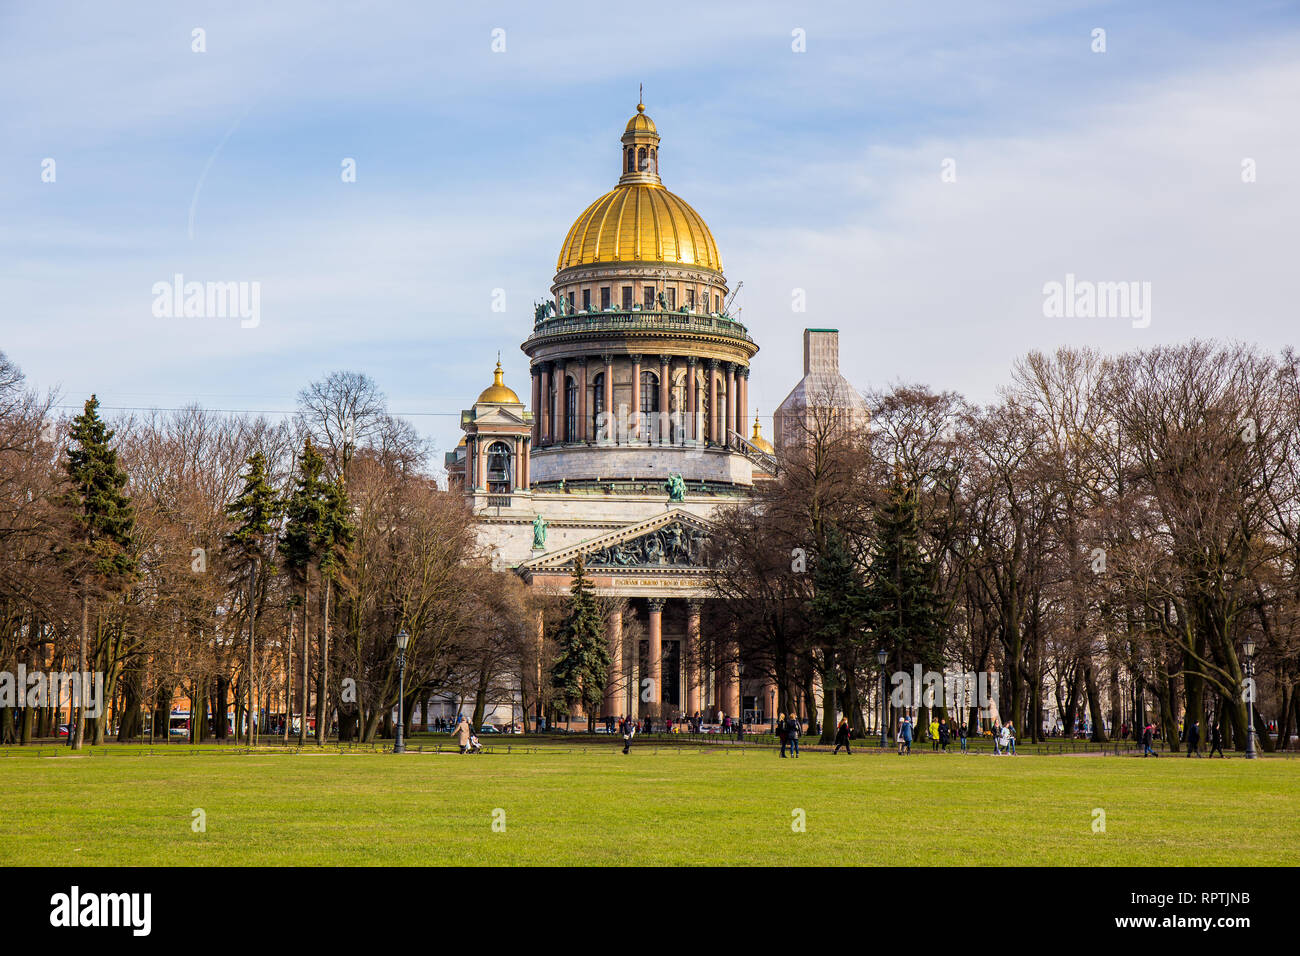 Saint Isaac's Cathedral, ornate religious edifice with gold dome - Saint Petersburg, Russia Stock Photo